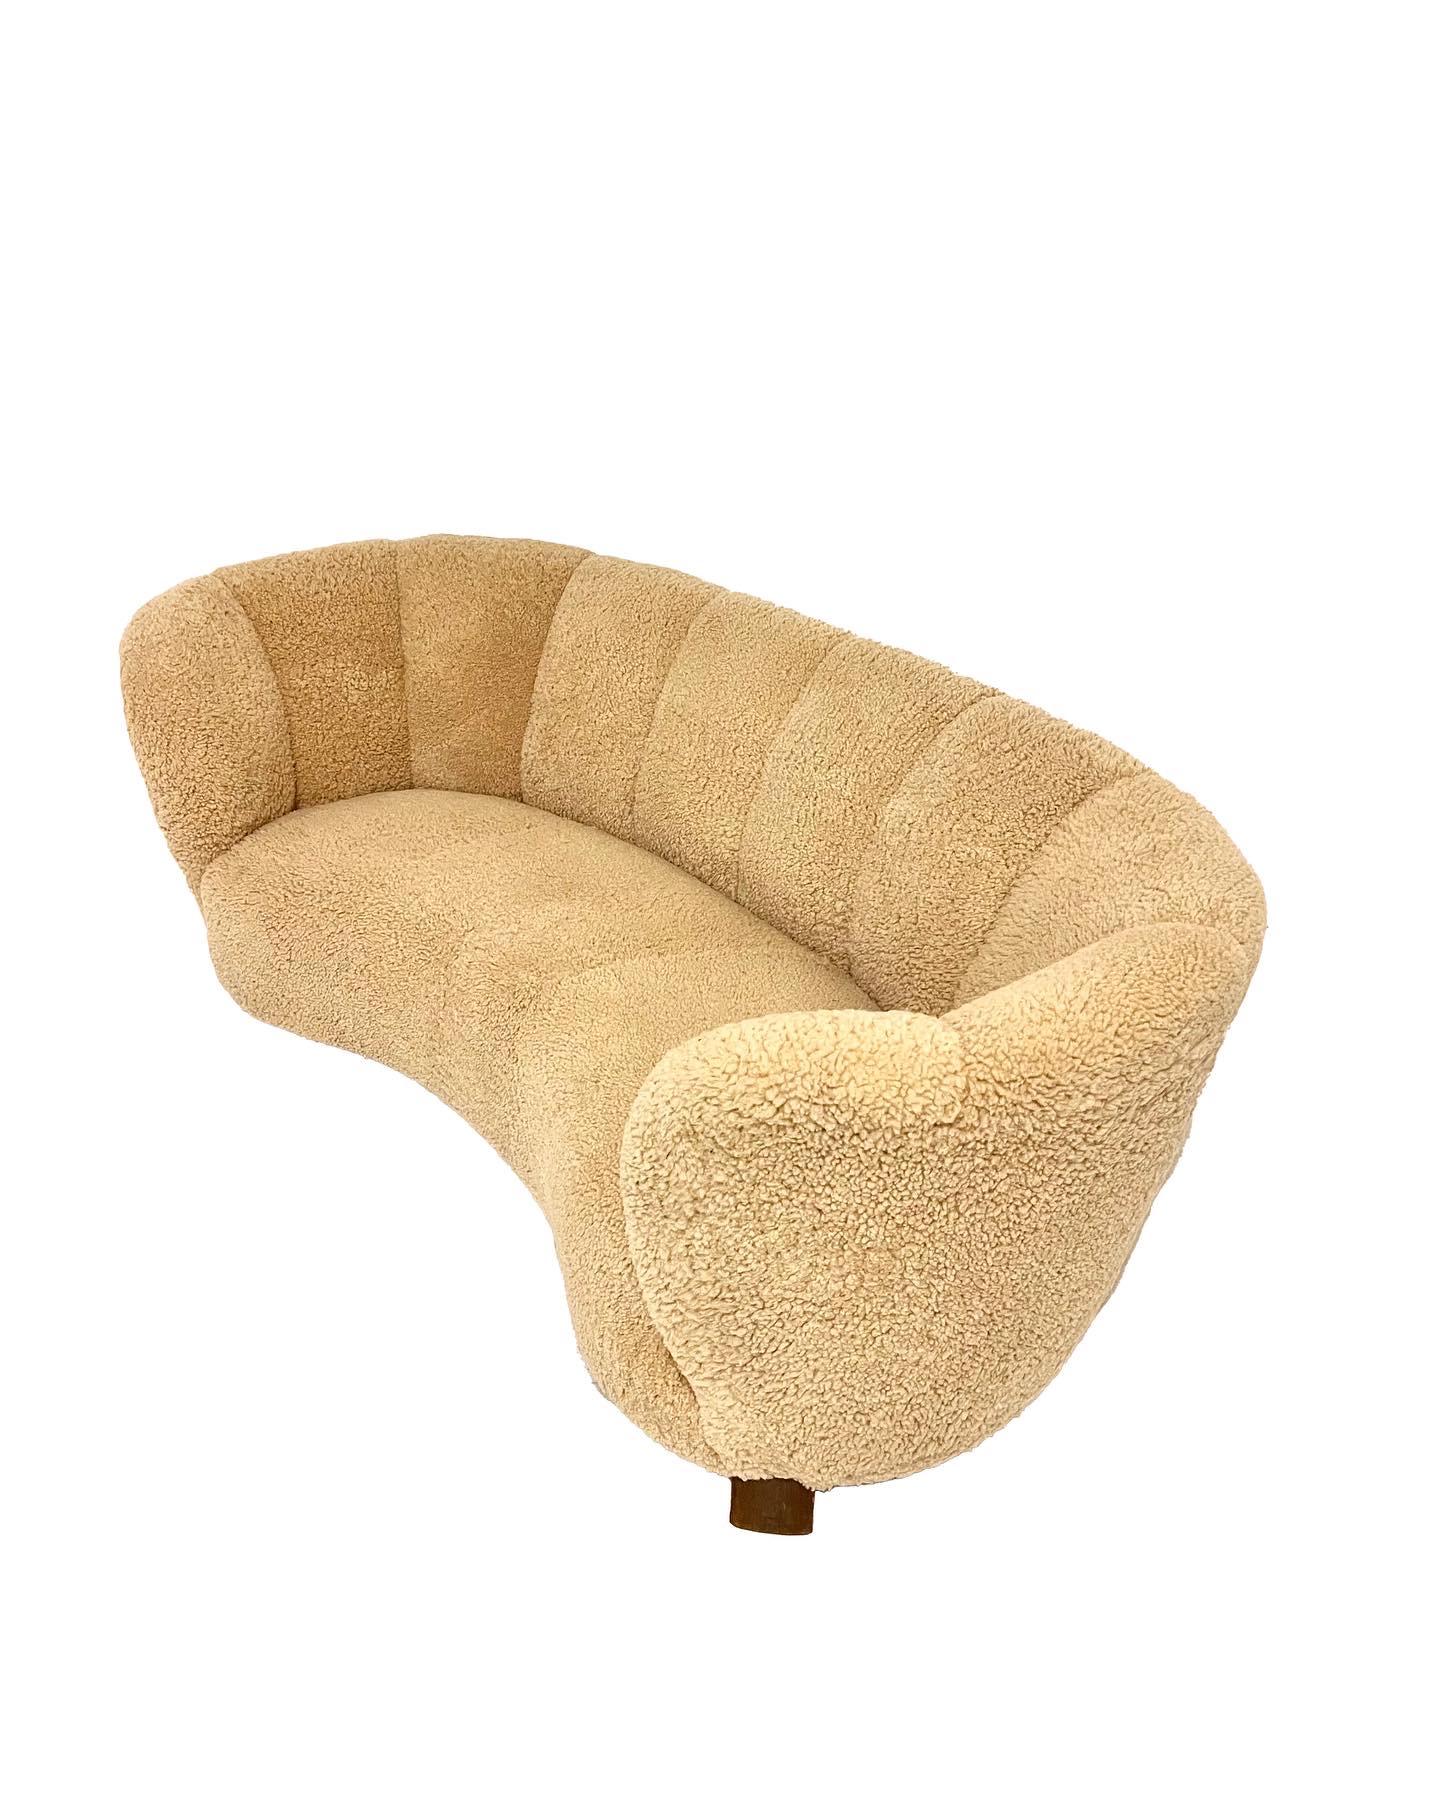 Lambskin 3 Seater Curved Sofa, Attributed to Fritz Hansen, Denmark C. 1930’s in Shearling